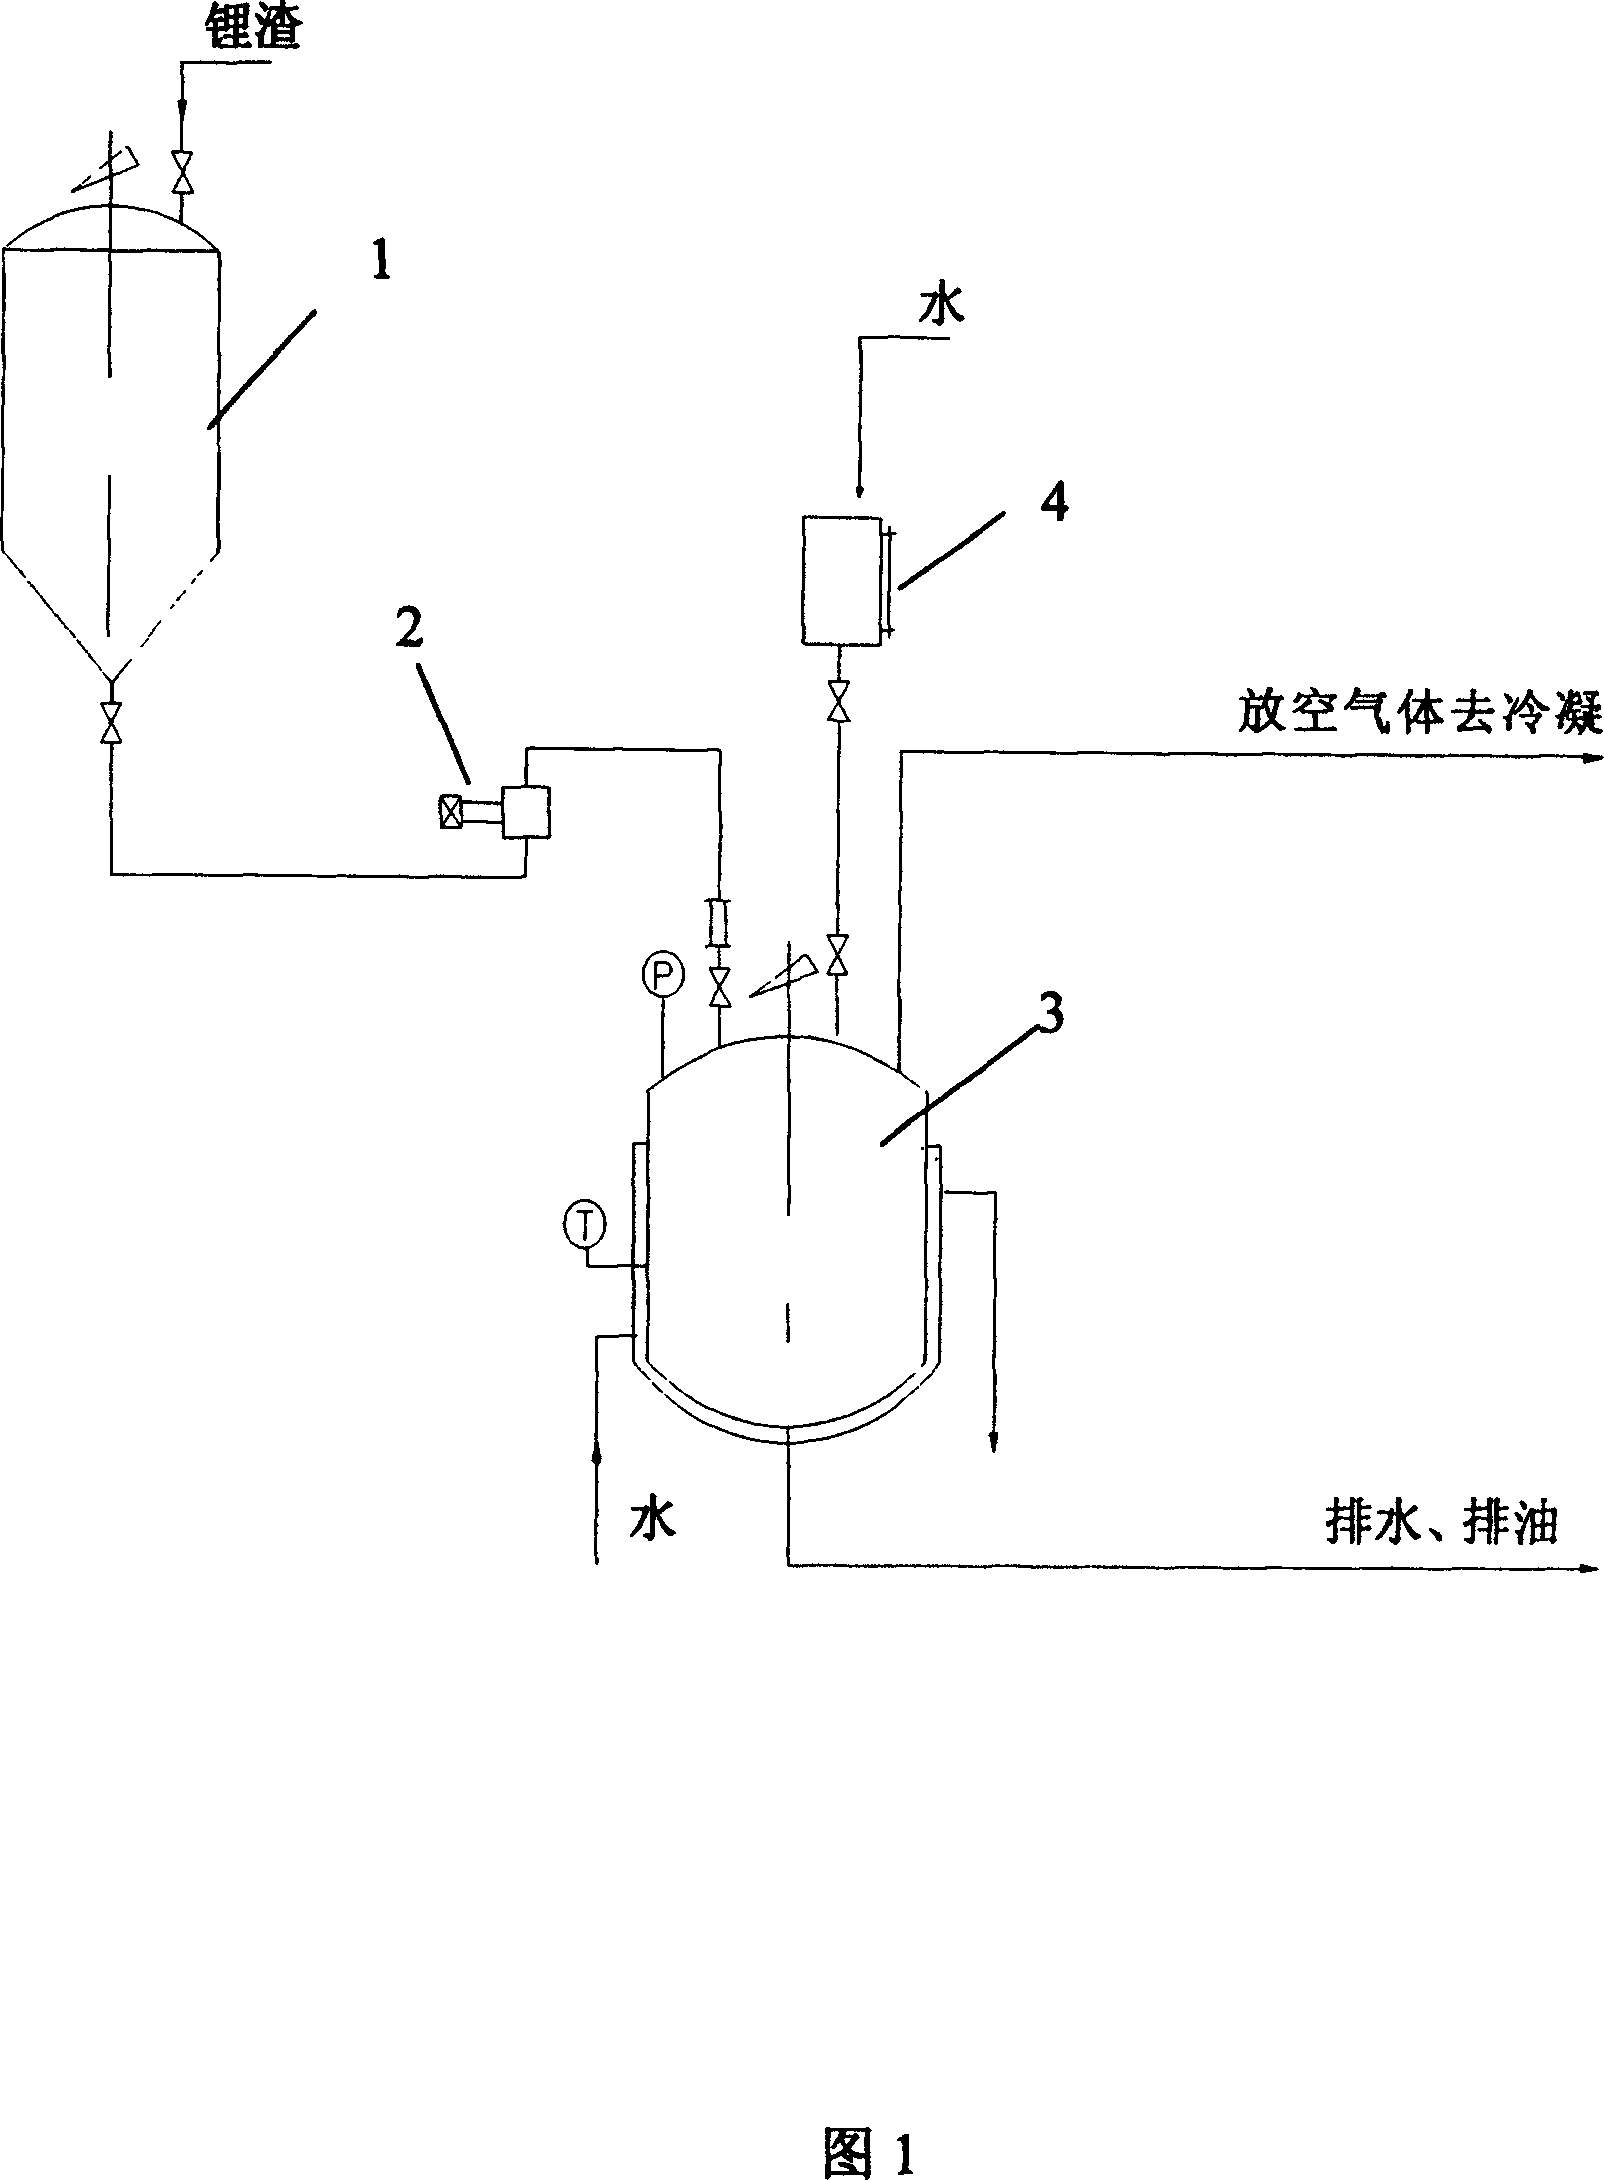 Hydrolysis method for lithium slag from lithium alkyl synthesis